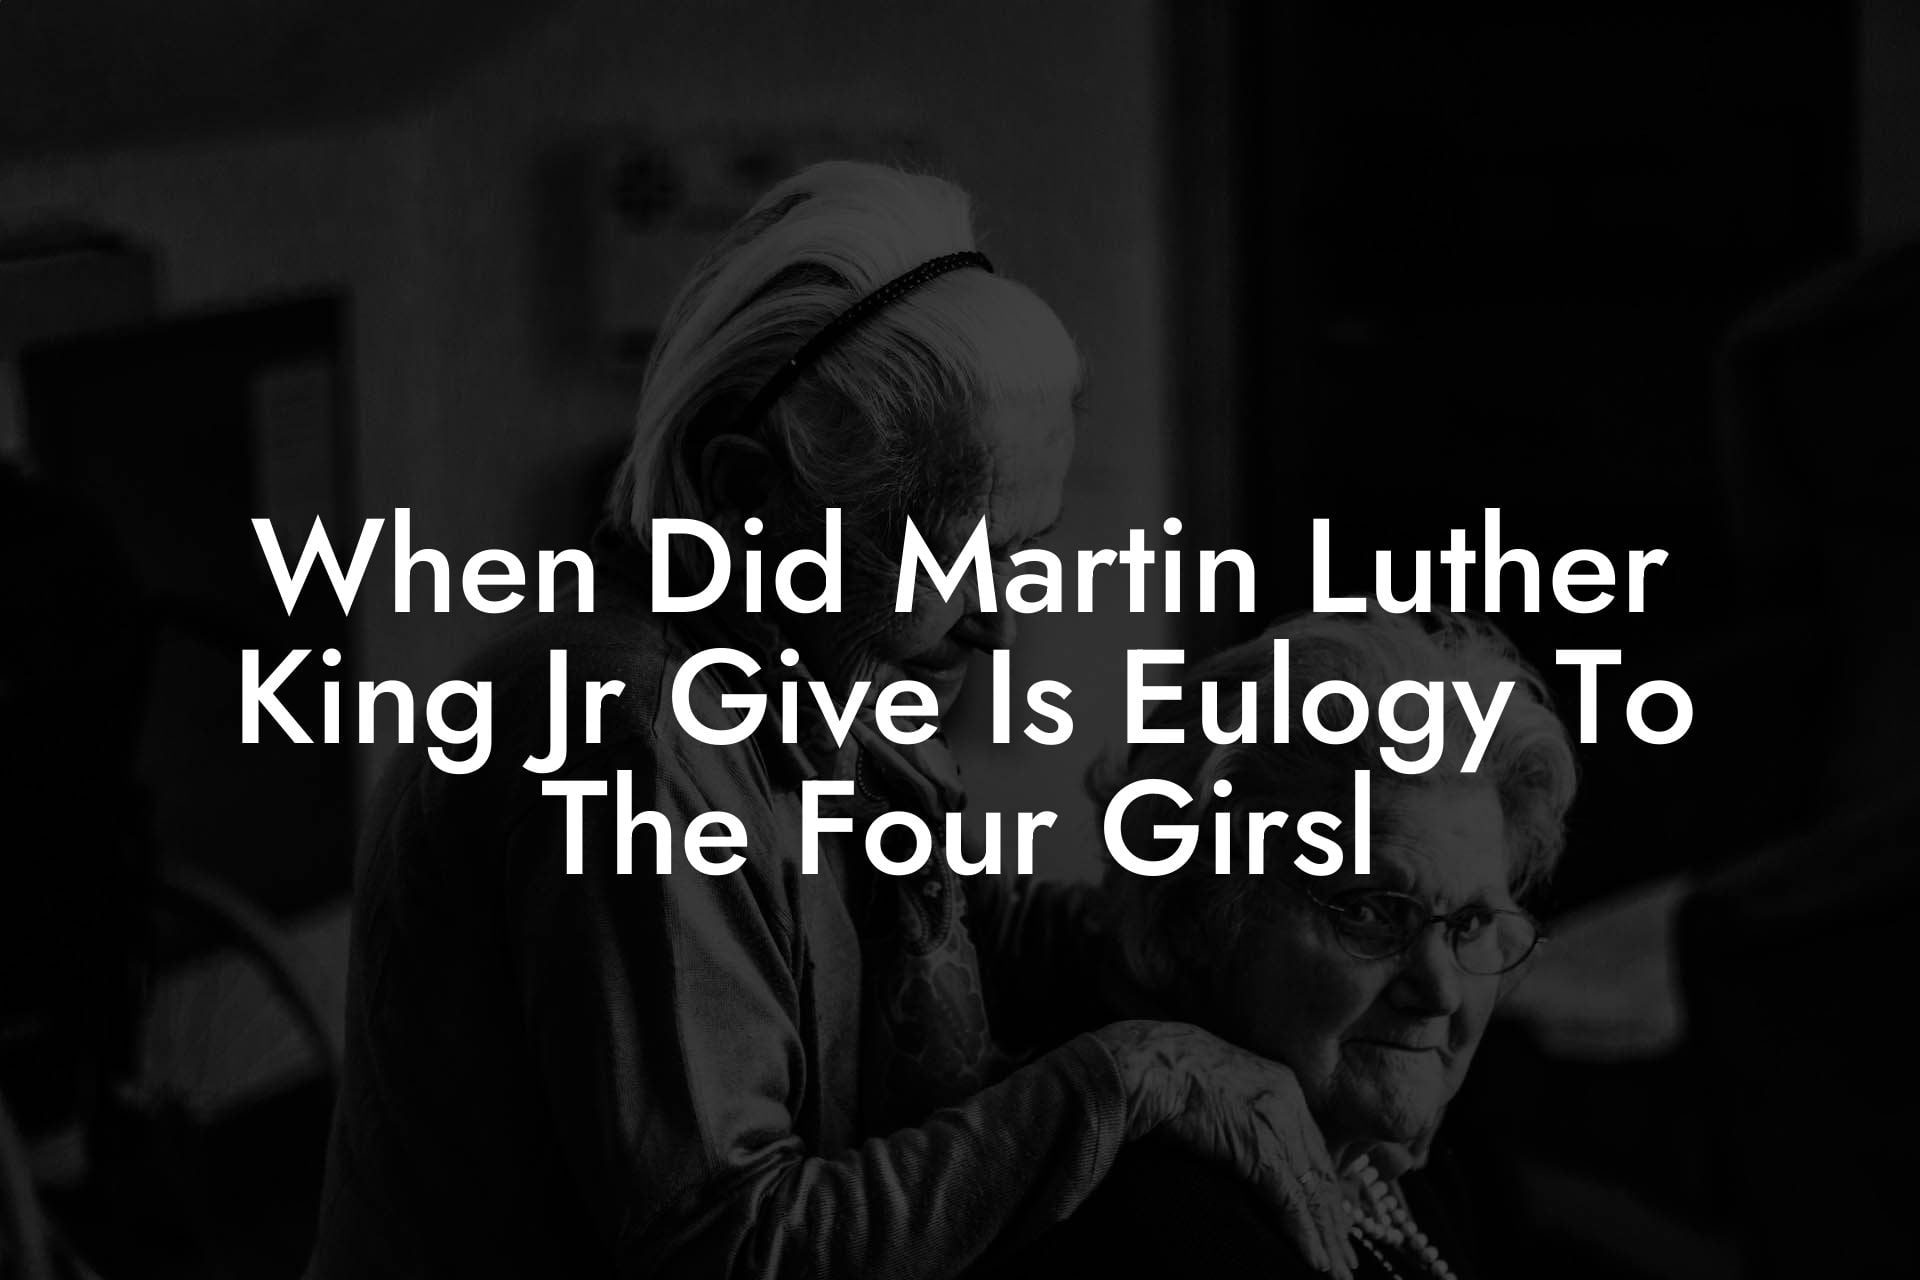 When Did Martin Luther King Jr Give Is Eulogy To The Four Girsl